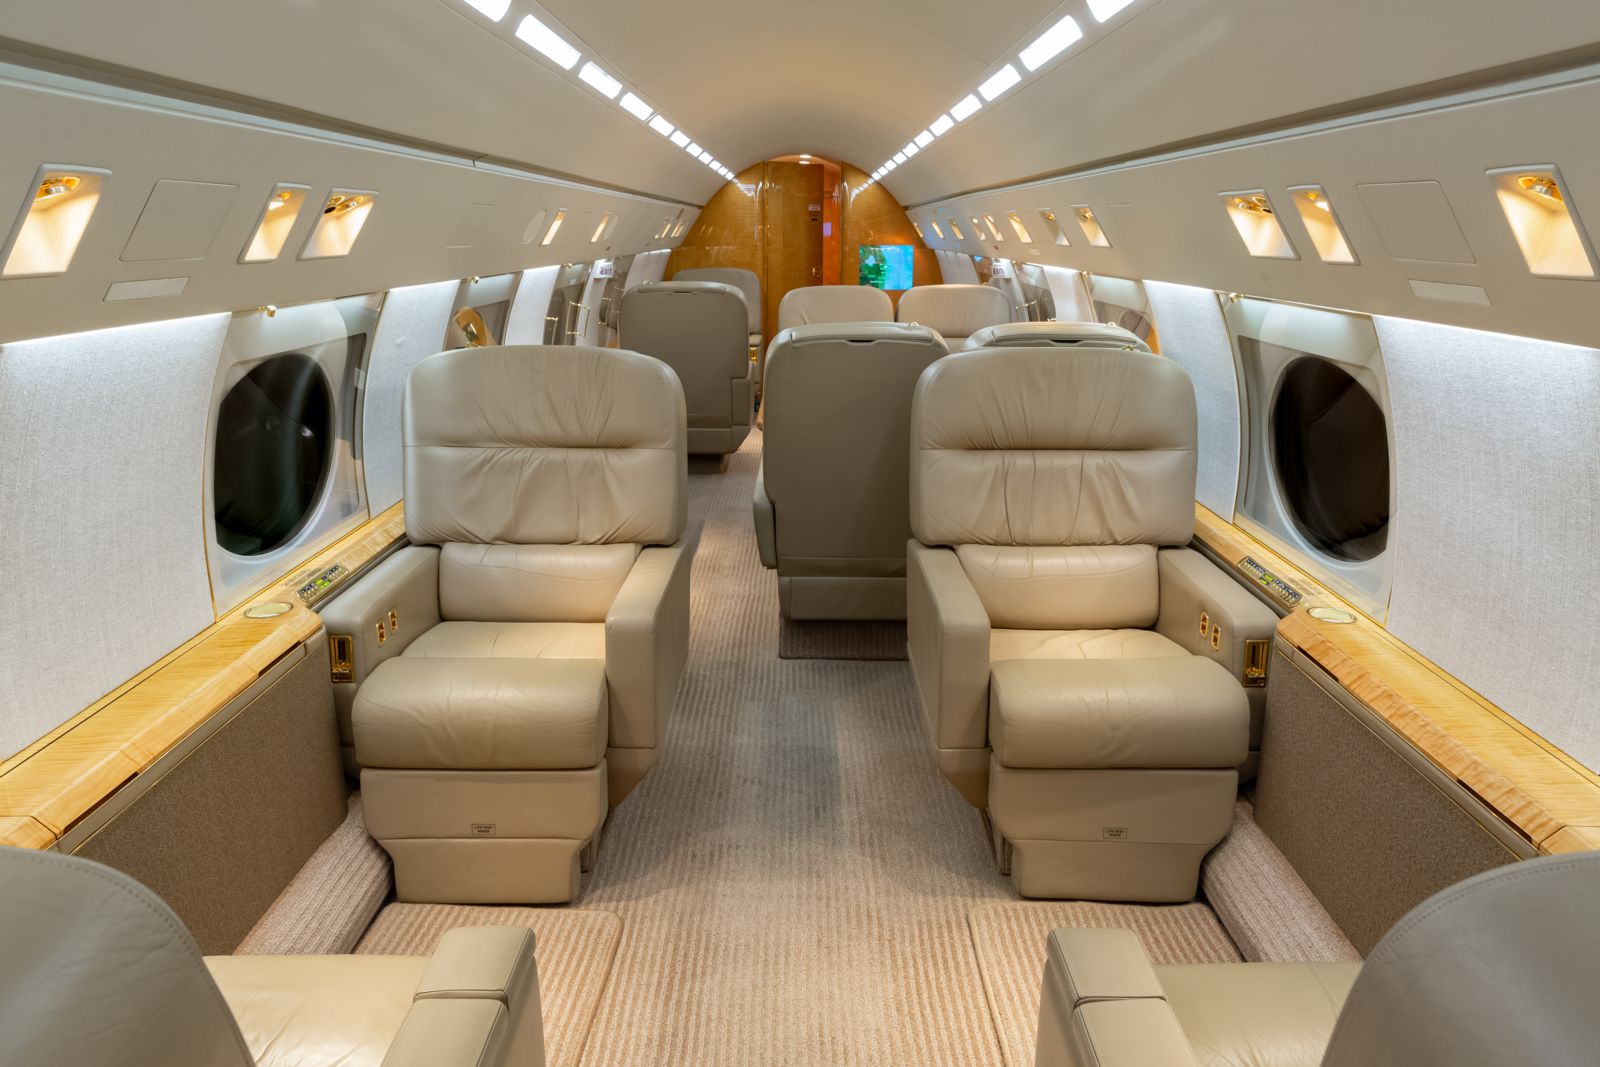 Gulfstream GV  S/N 563 for sale | gallery image: /userfiles/files/3%20bfp_9942%20fwd%20looking%20aft%20no%20table.jpg